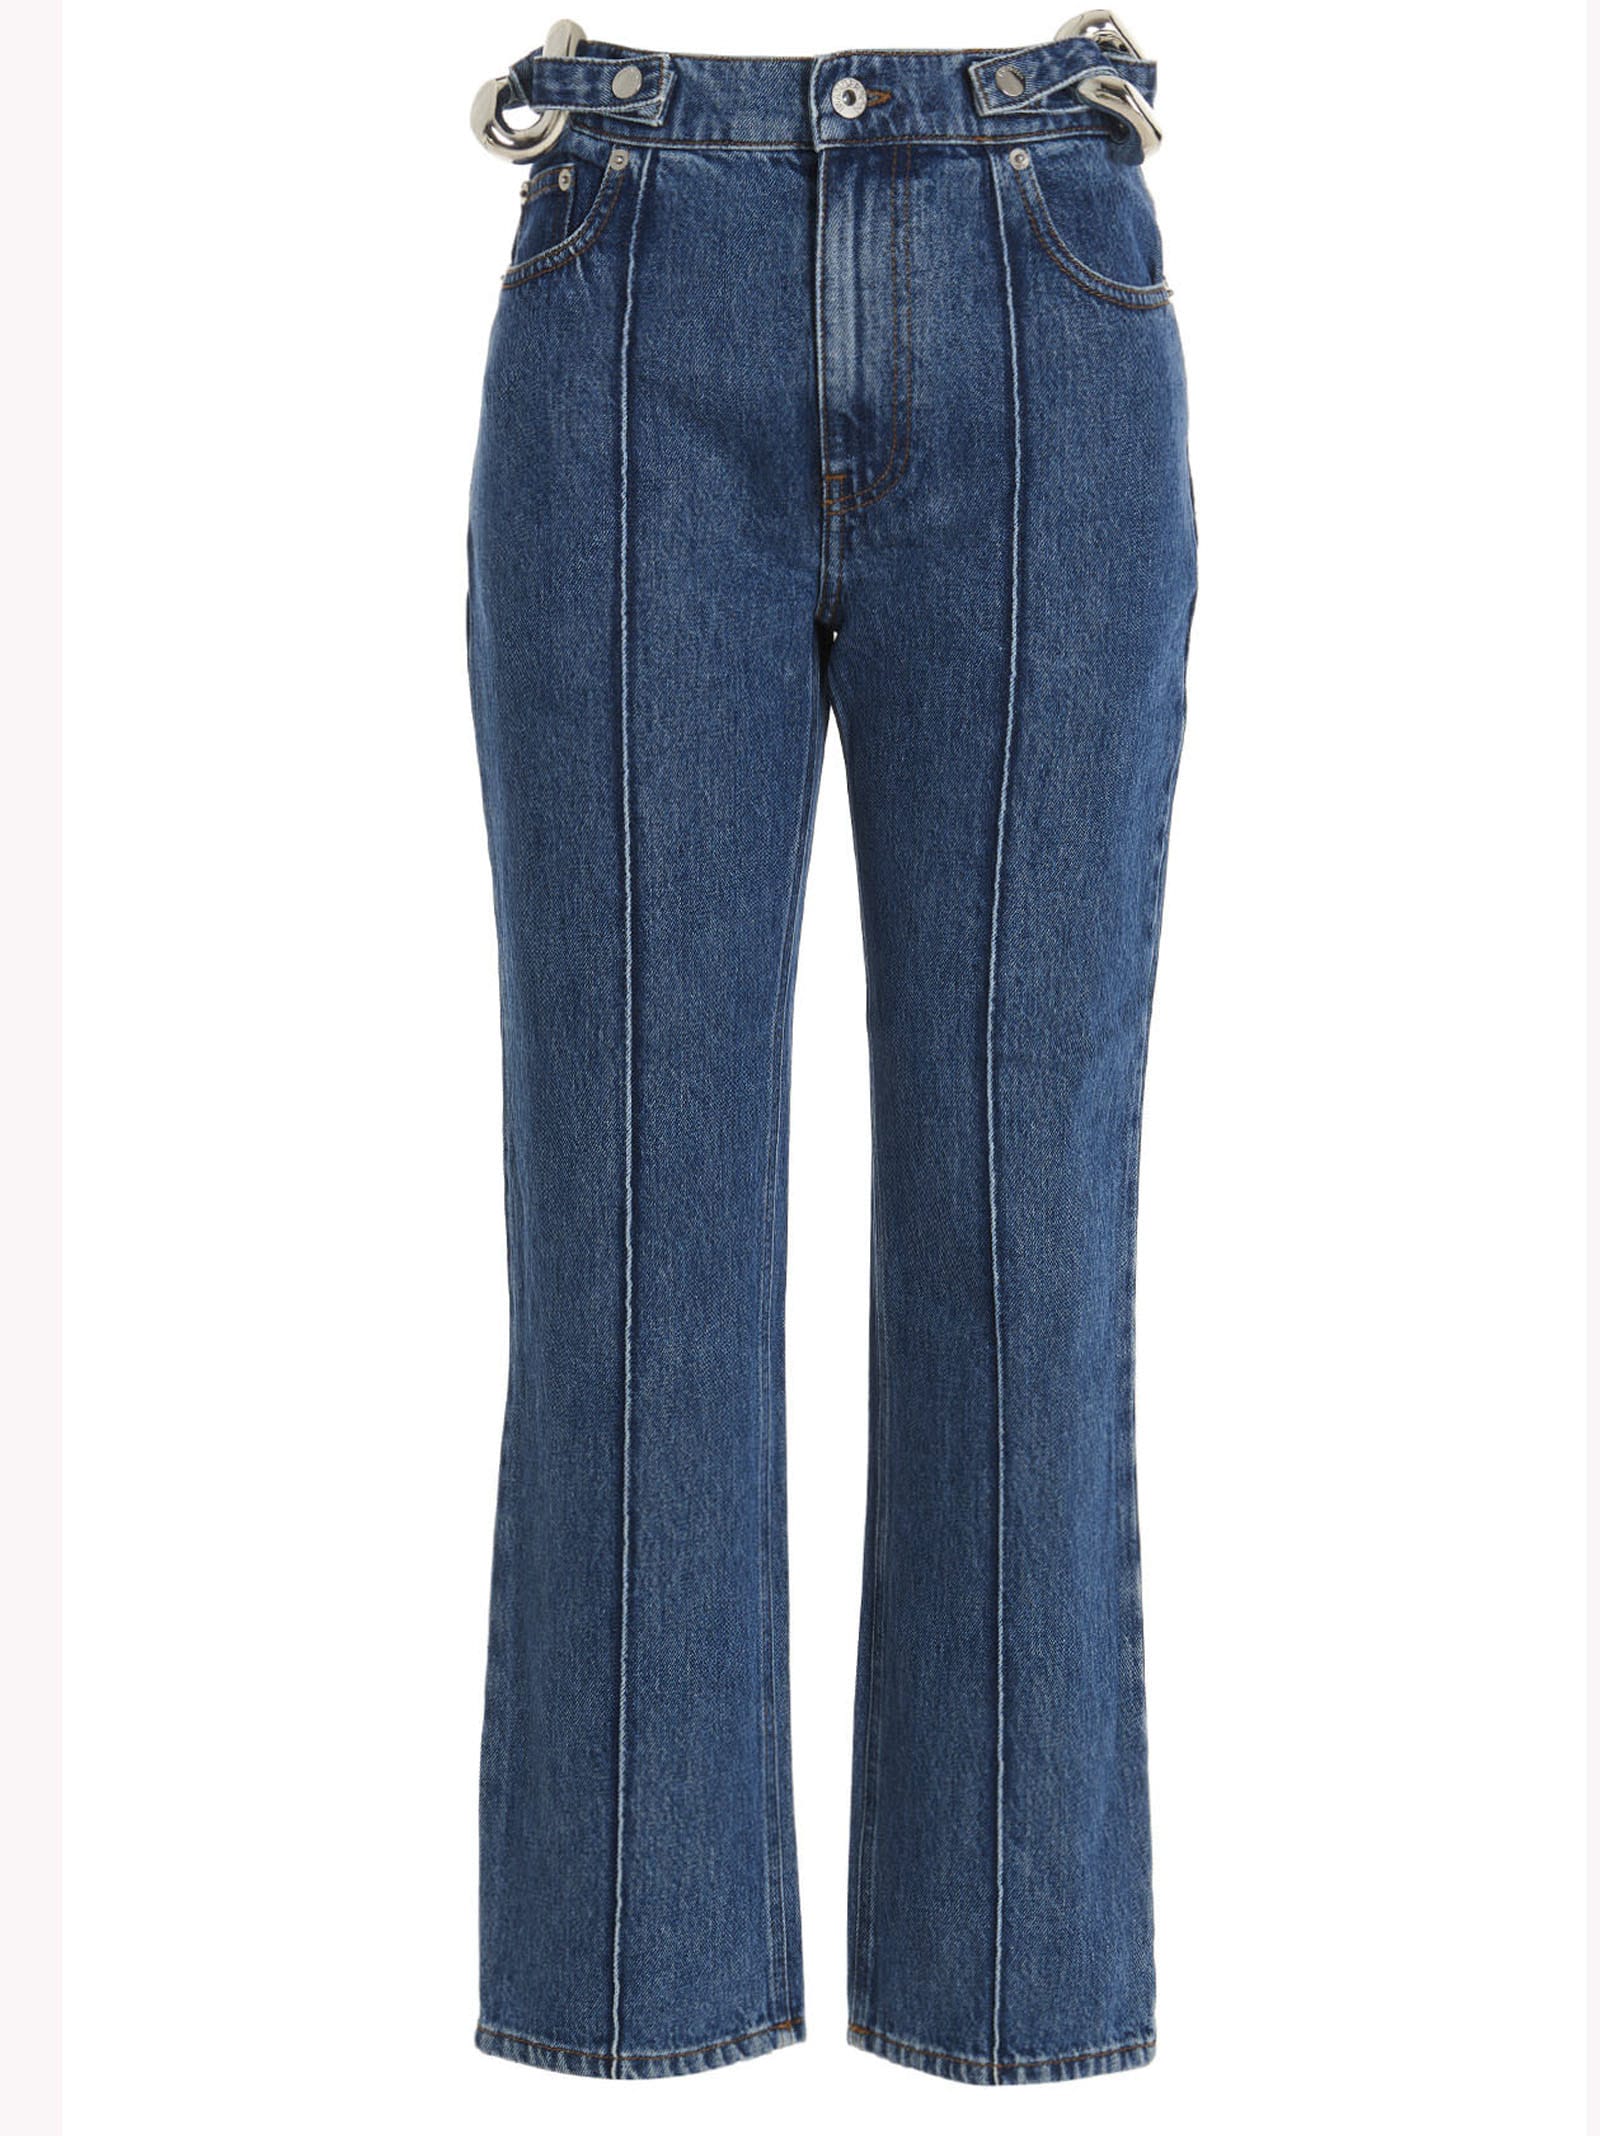 JW ANDERSON CHAIN LINK JEANS